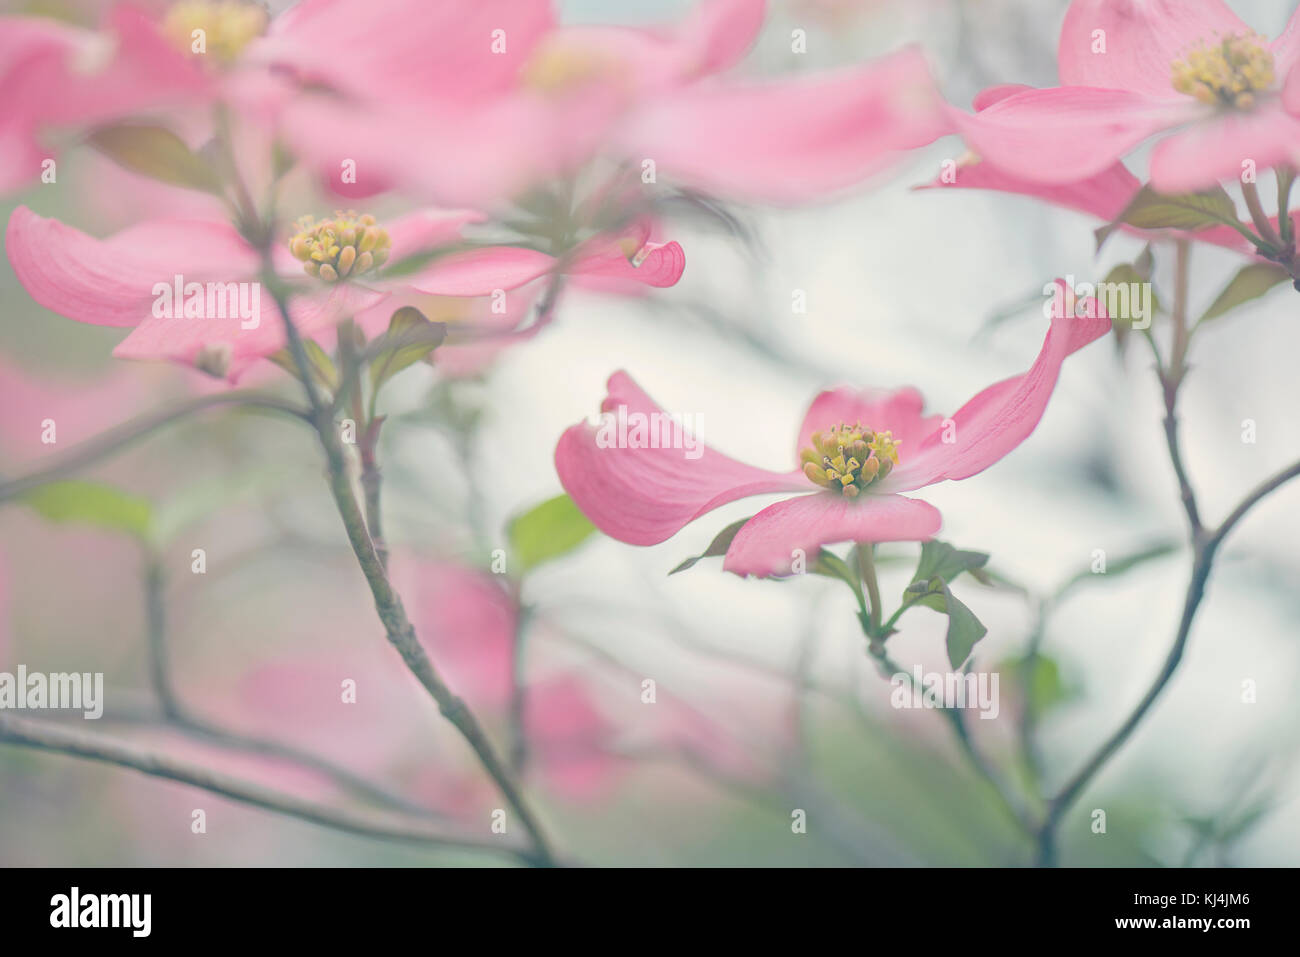 Pink dogwood flower isolated on the tree Stock Photo